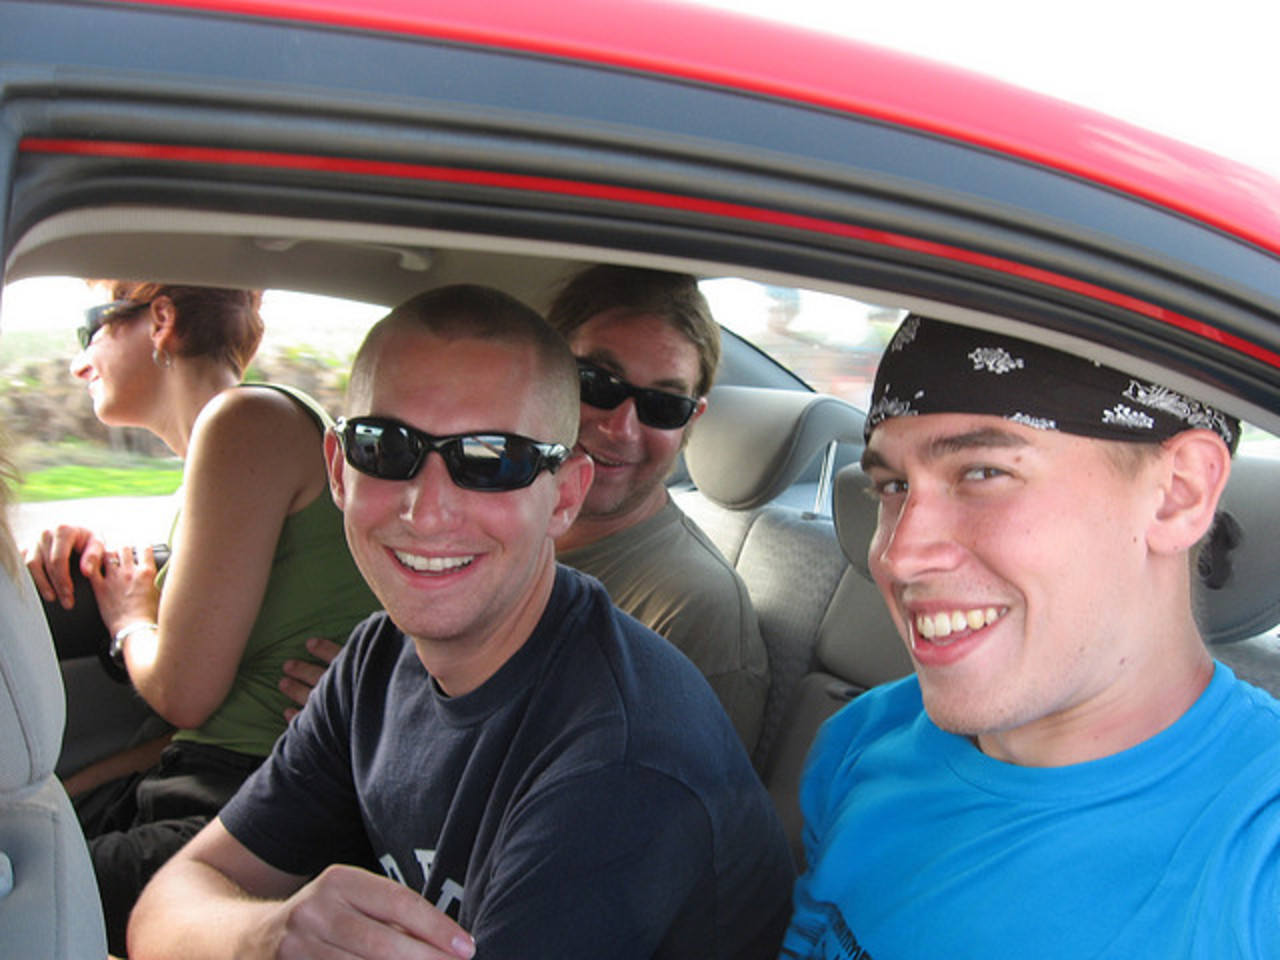 Self-taken) Cousins packed in the Dodge Attitude | Flickr - Photo ...